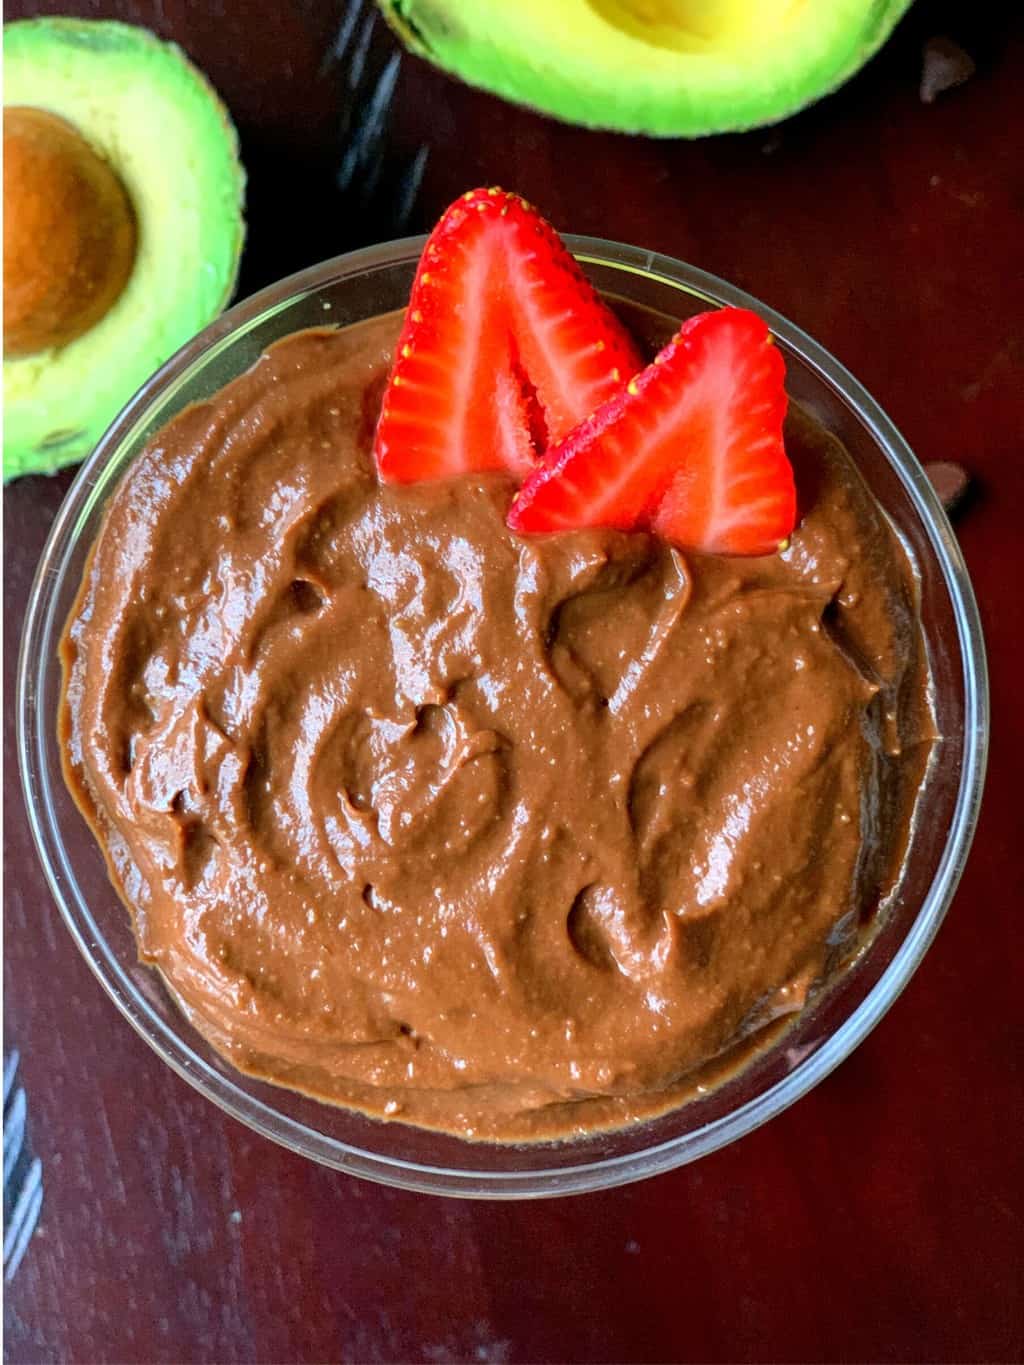 avocado chocolate mousse in a glass bowl with strawberries on top and avocados on side for garnish